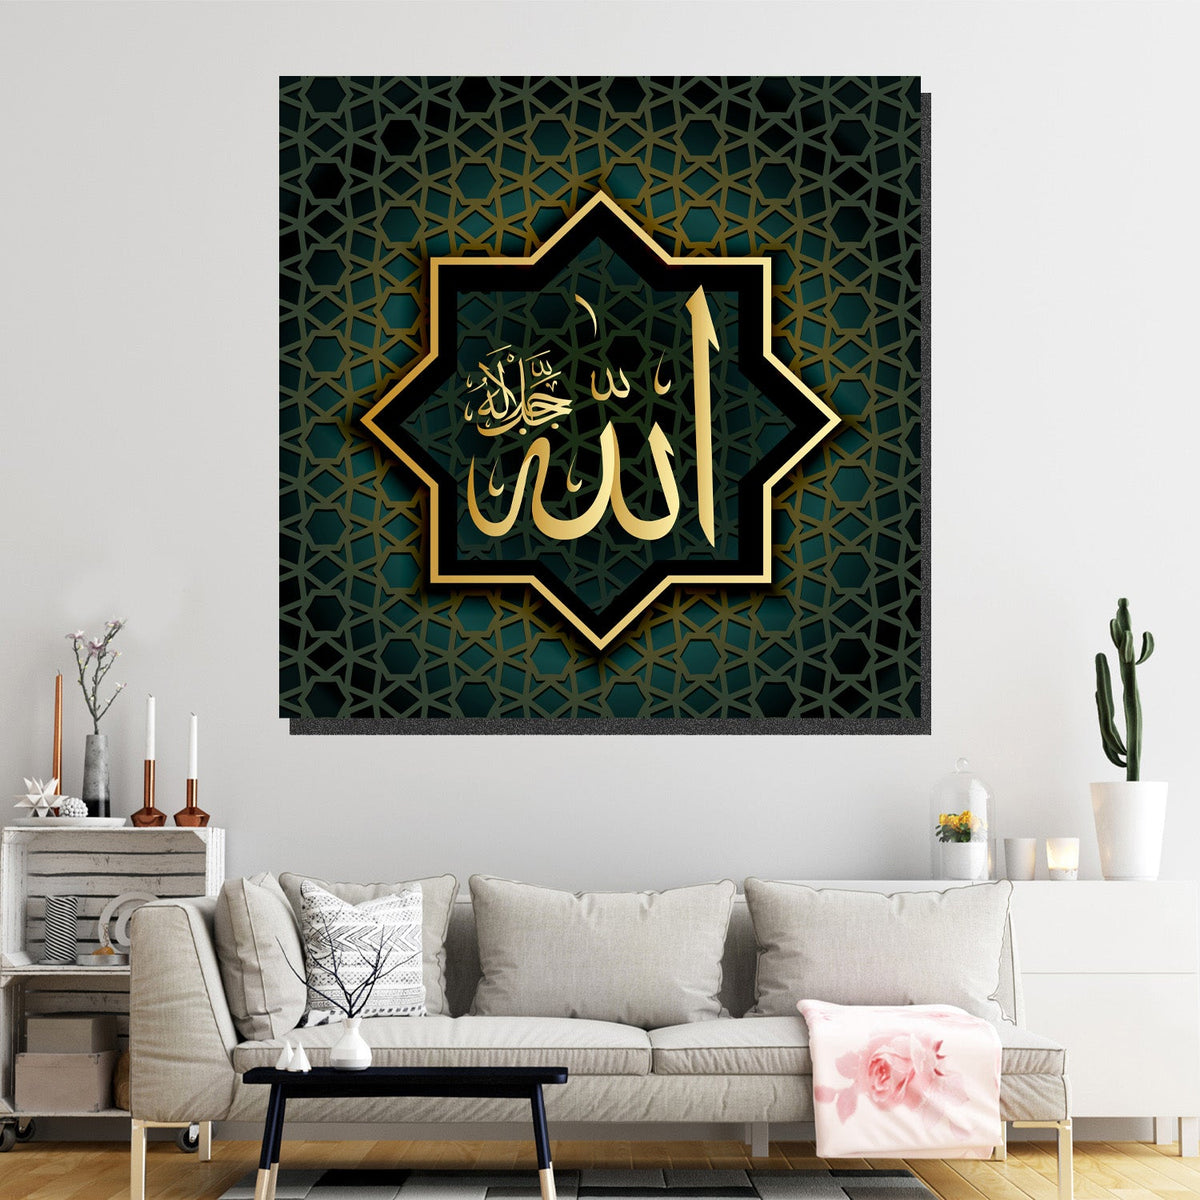 https://cdn.shopify.com/s/files/1/0387/9986/8044/products/IslamicArtLimitedEdition13CanvasArtprintStretched-2.jpg